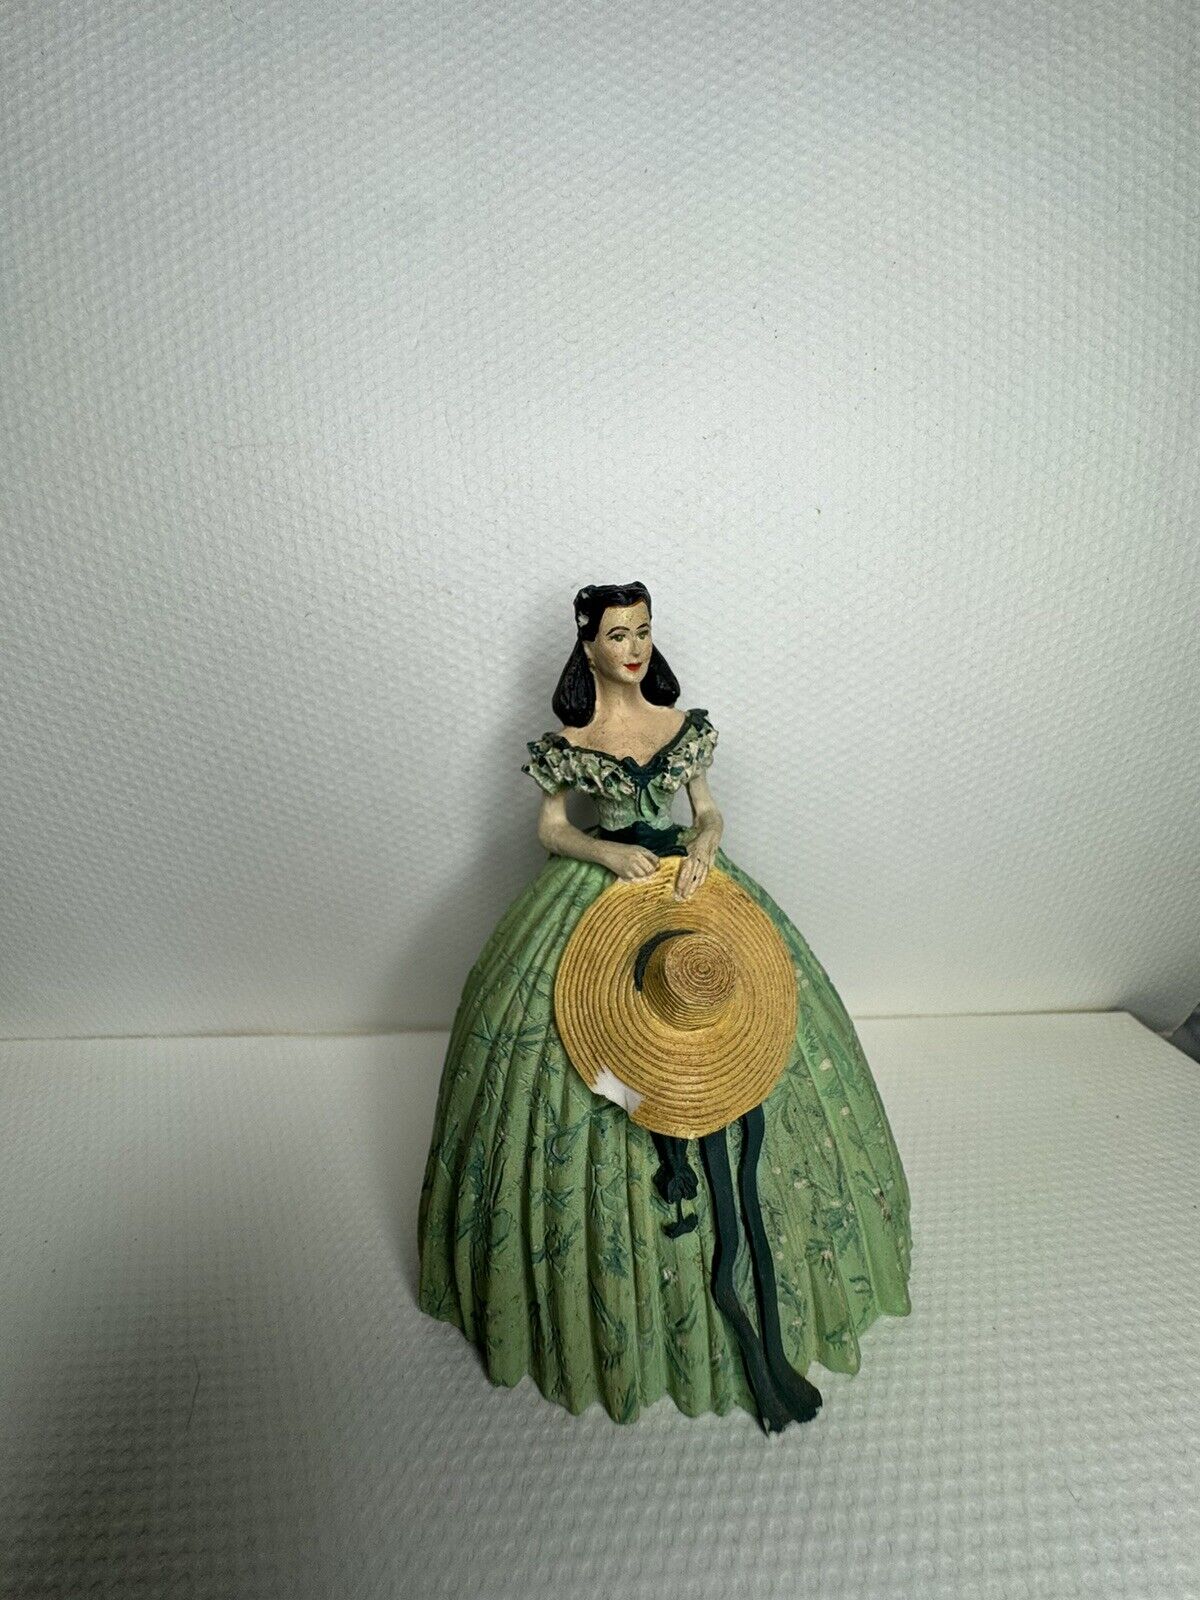 The Franklin Mint - Gone With The Wind - Scarlett O\'Hara - Sculpture Figurine